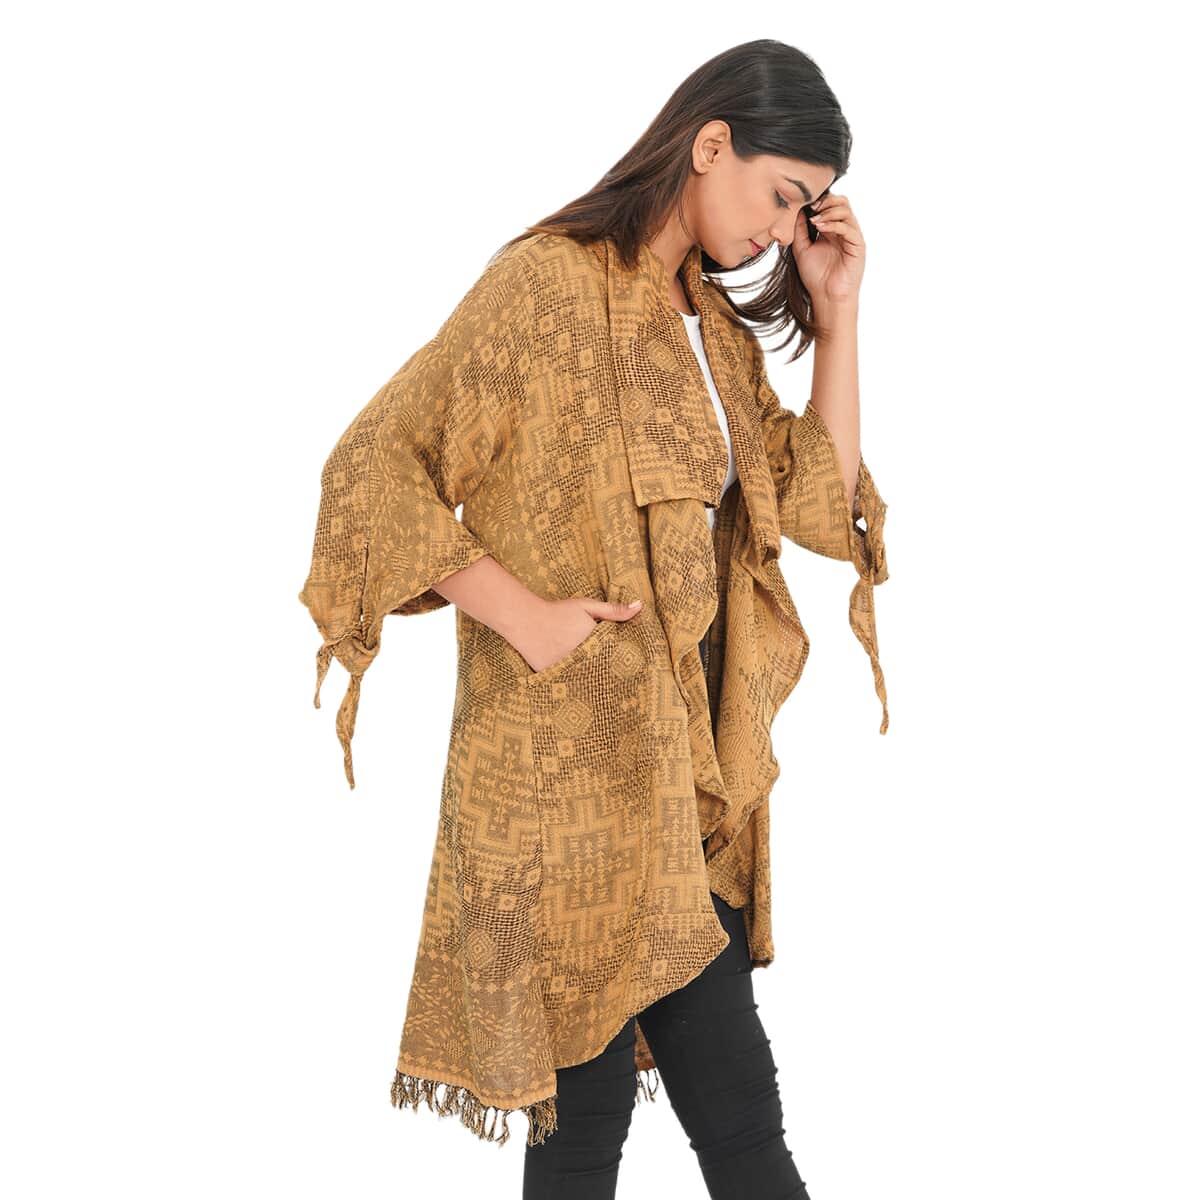 Passage Gold 100% Cotton Double Layer Jacquard Front Waterfall Cardigan - One size Plus, Cotton Cardigan, Women Cardigan, Maxi Cardigan, Summer Cardigan image number 3